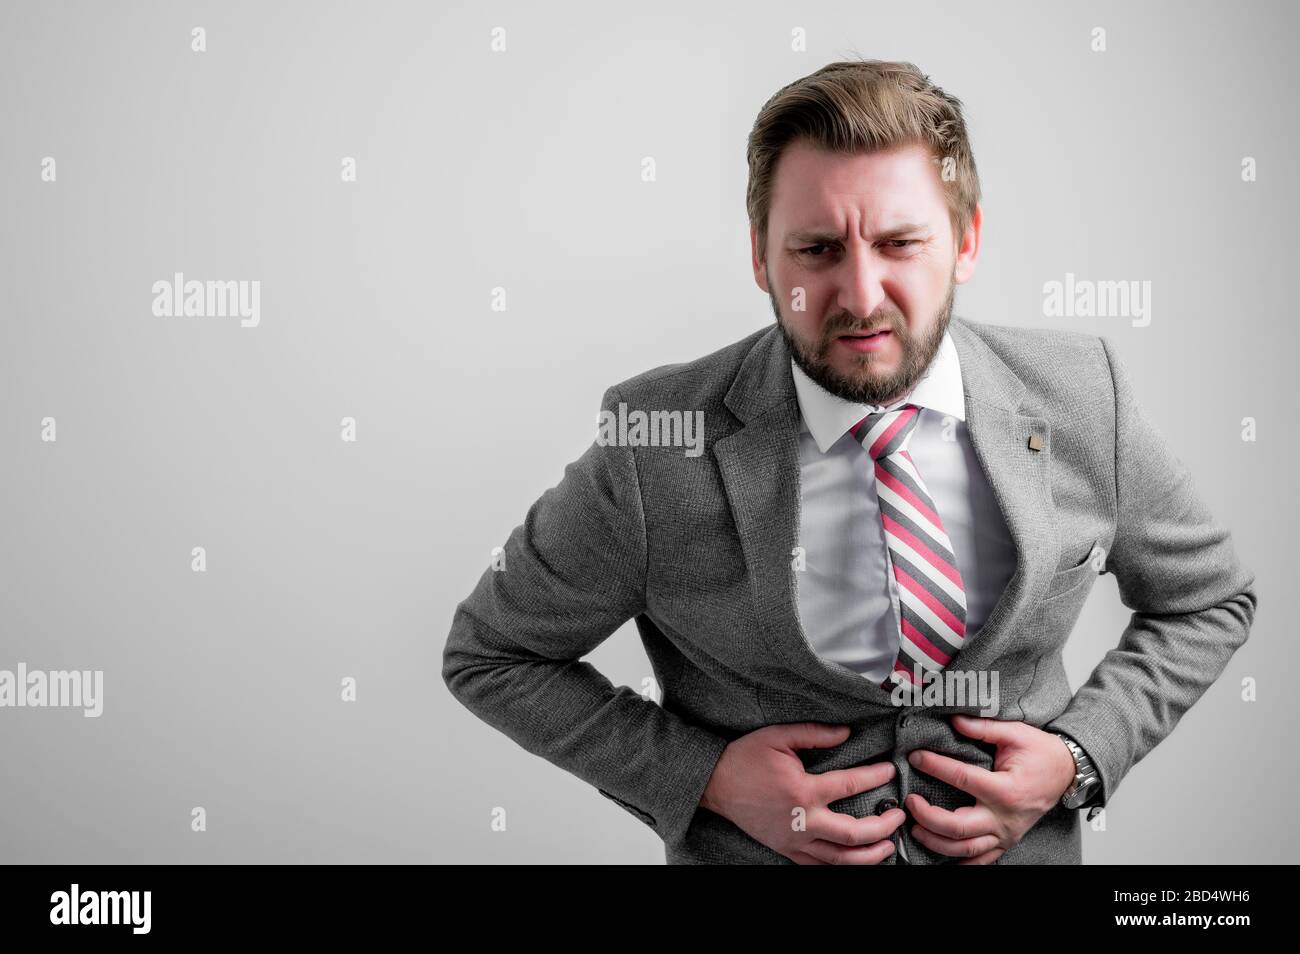 Portrait of business man wearing business clothes gesturing stomach ache isolated on grey background with copy space advertising area Stock Photo